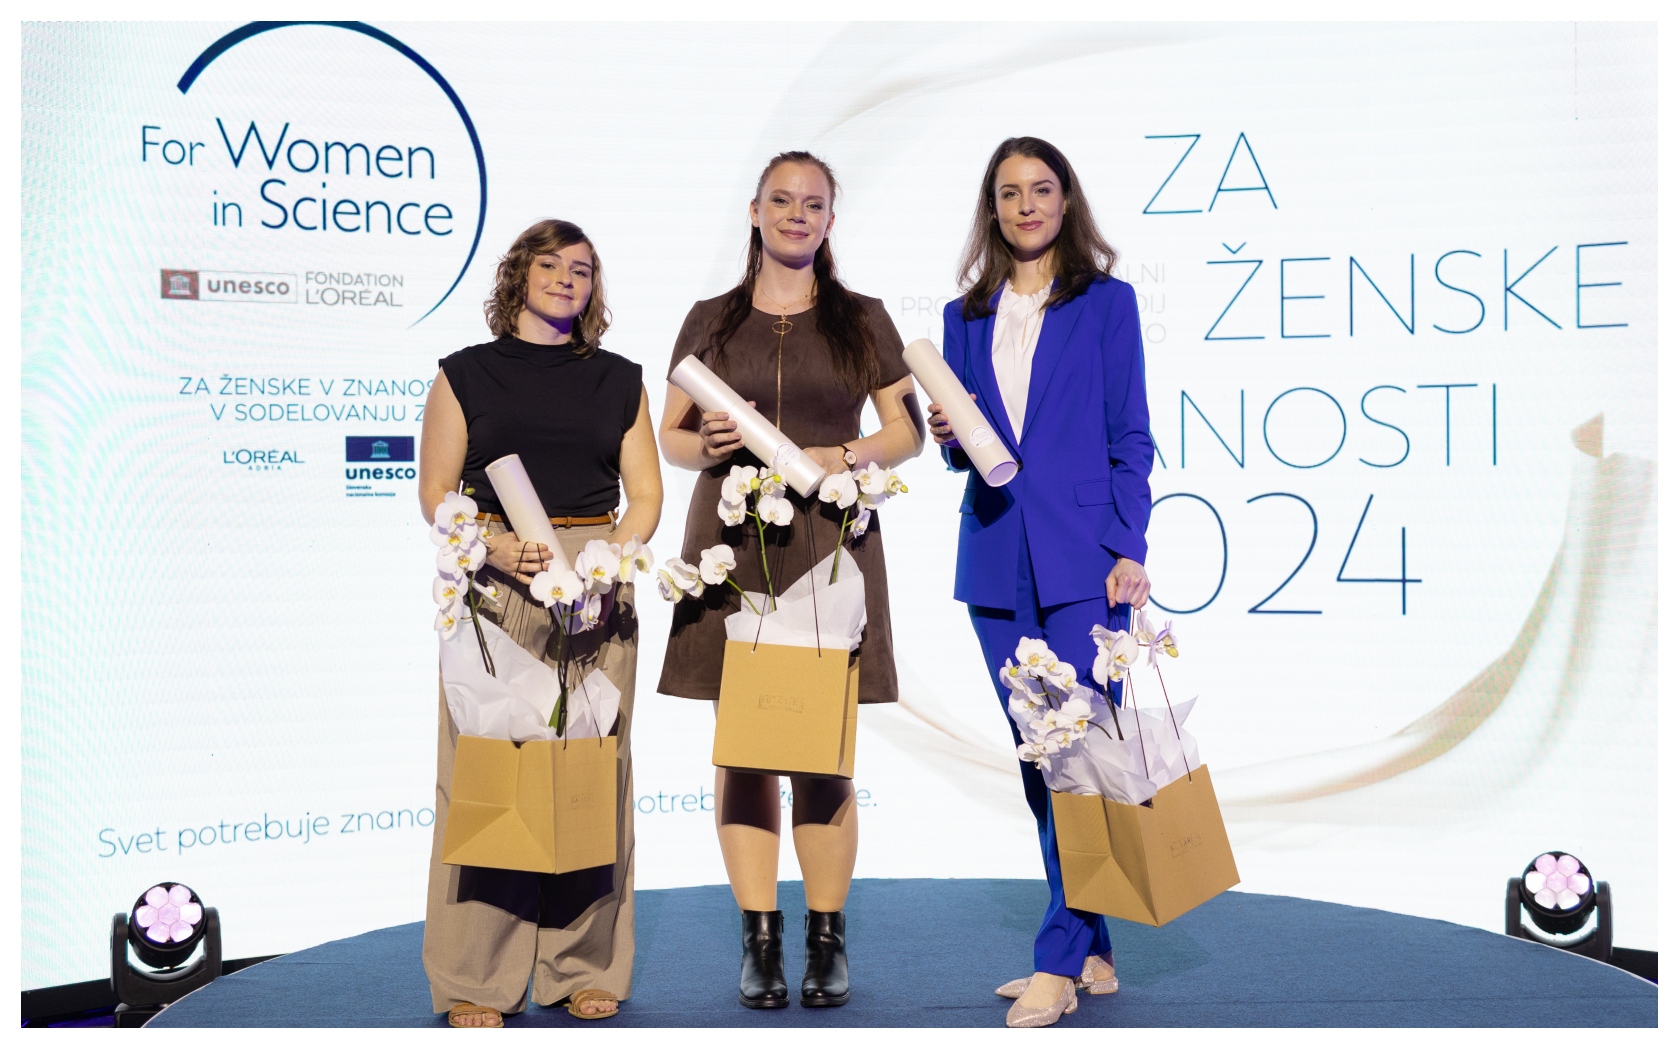 The L'Oréal – UNESCO National Program »For Women in Science« in Slovenia honor physicist, biochemist and chemist